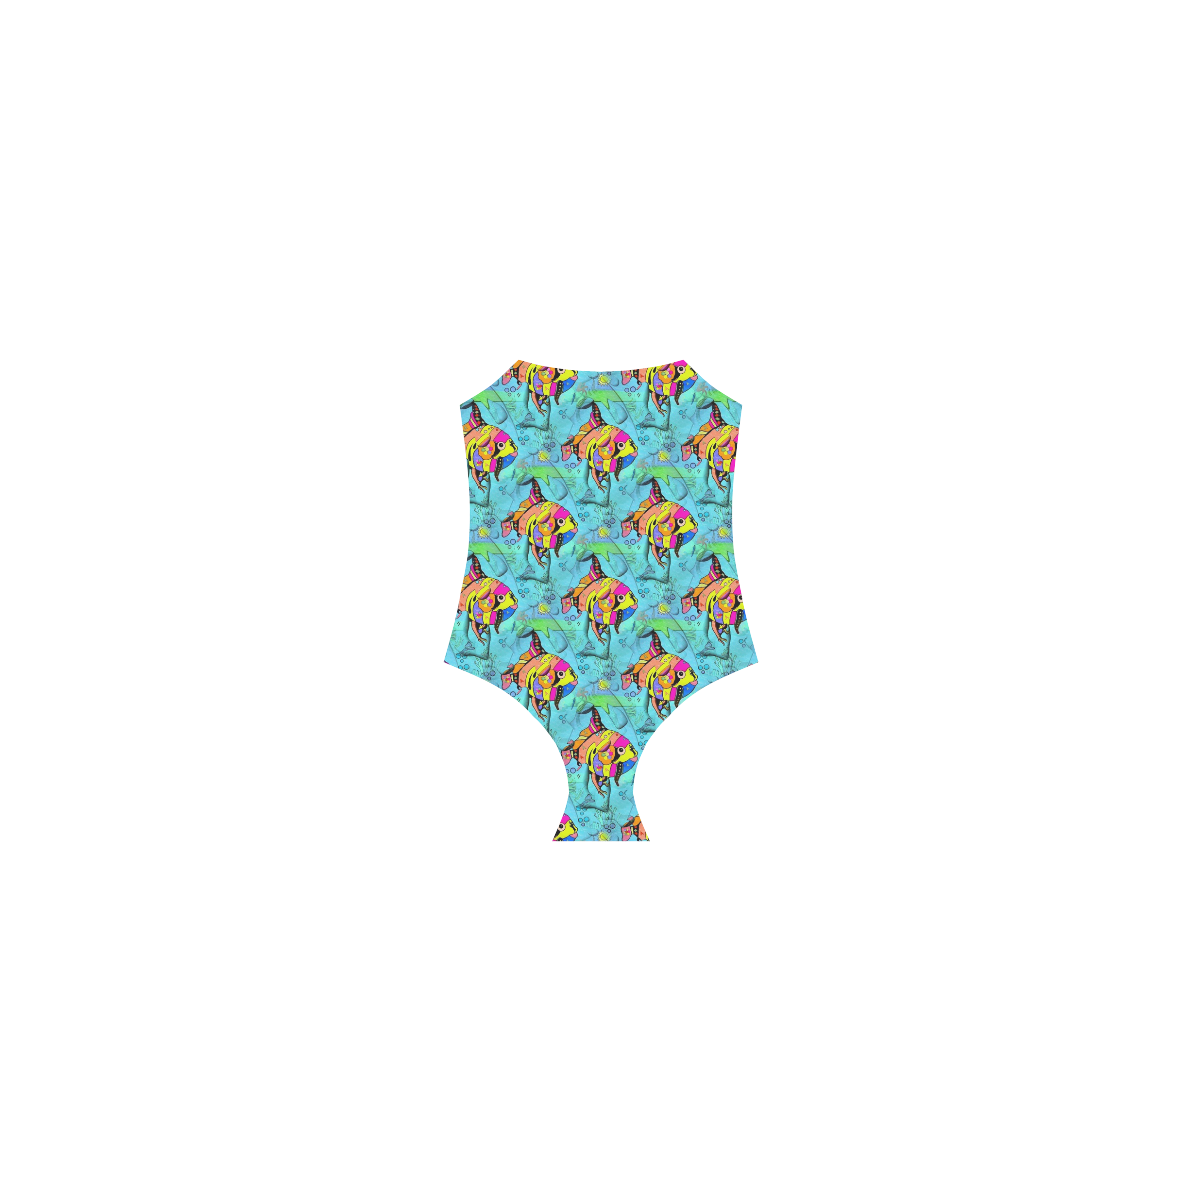 Lovely Fish by Nico Bielow Strap Swimsuit ( Model S05)